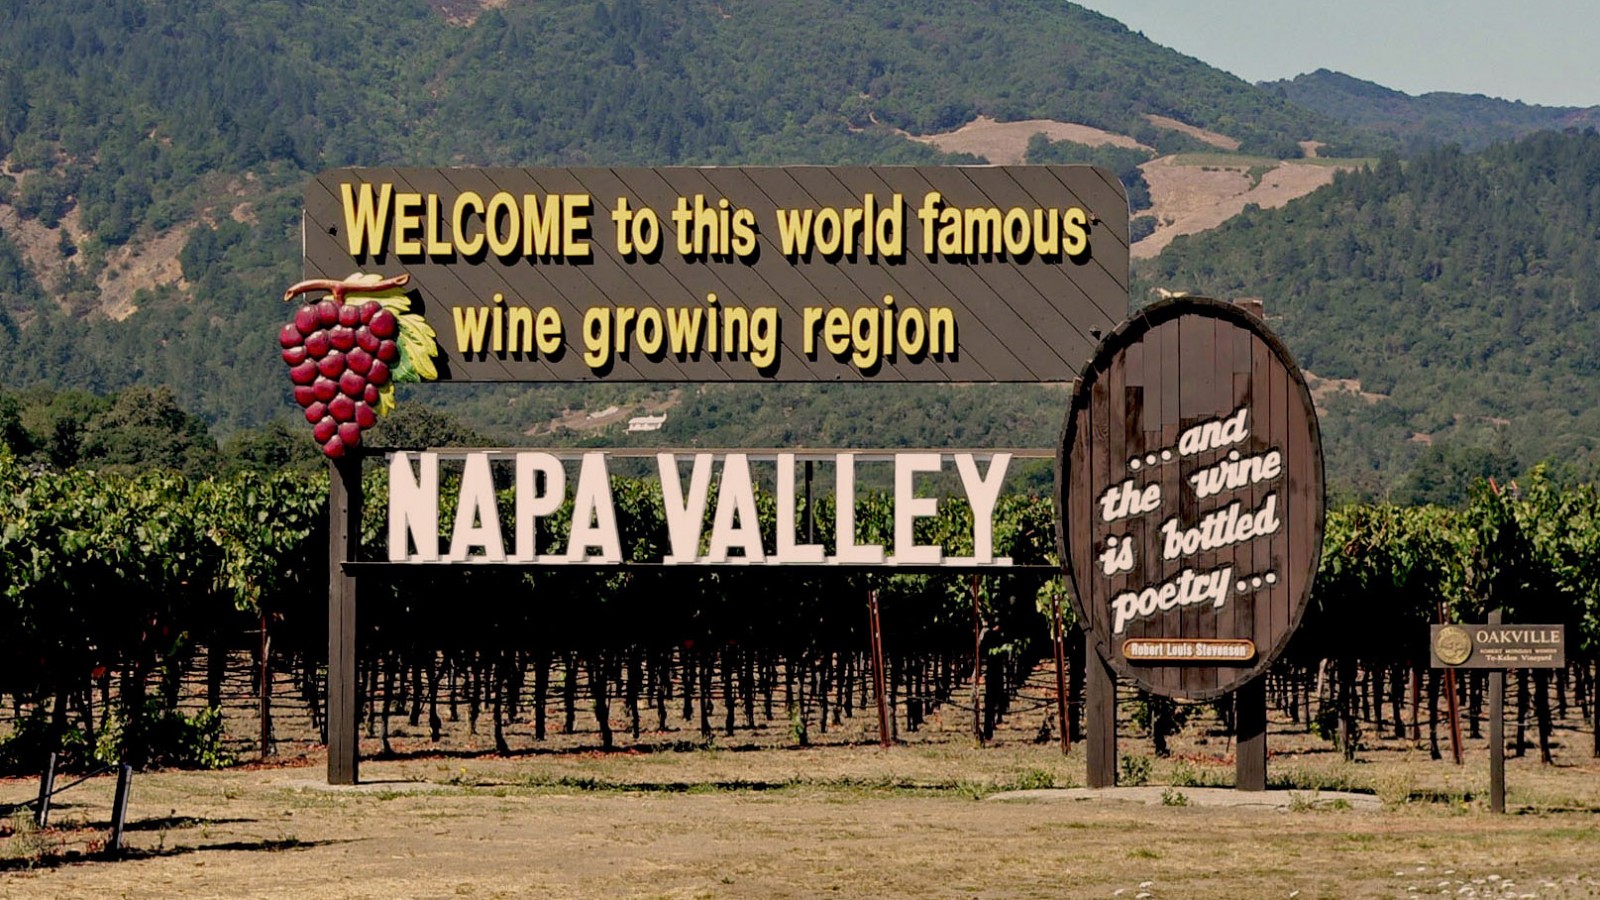 Welcome to world famous Napa Valley